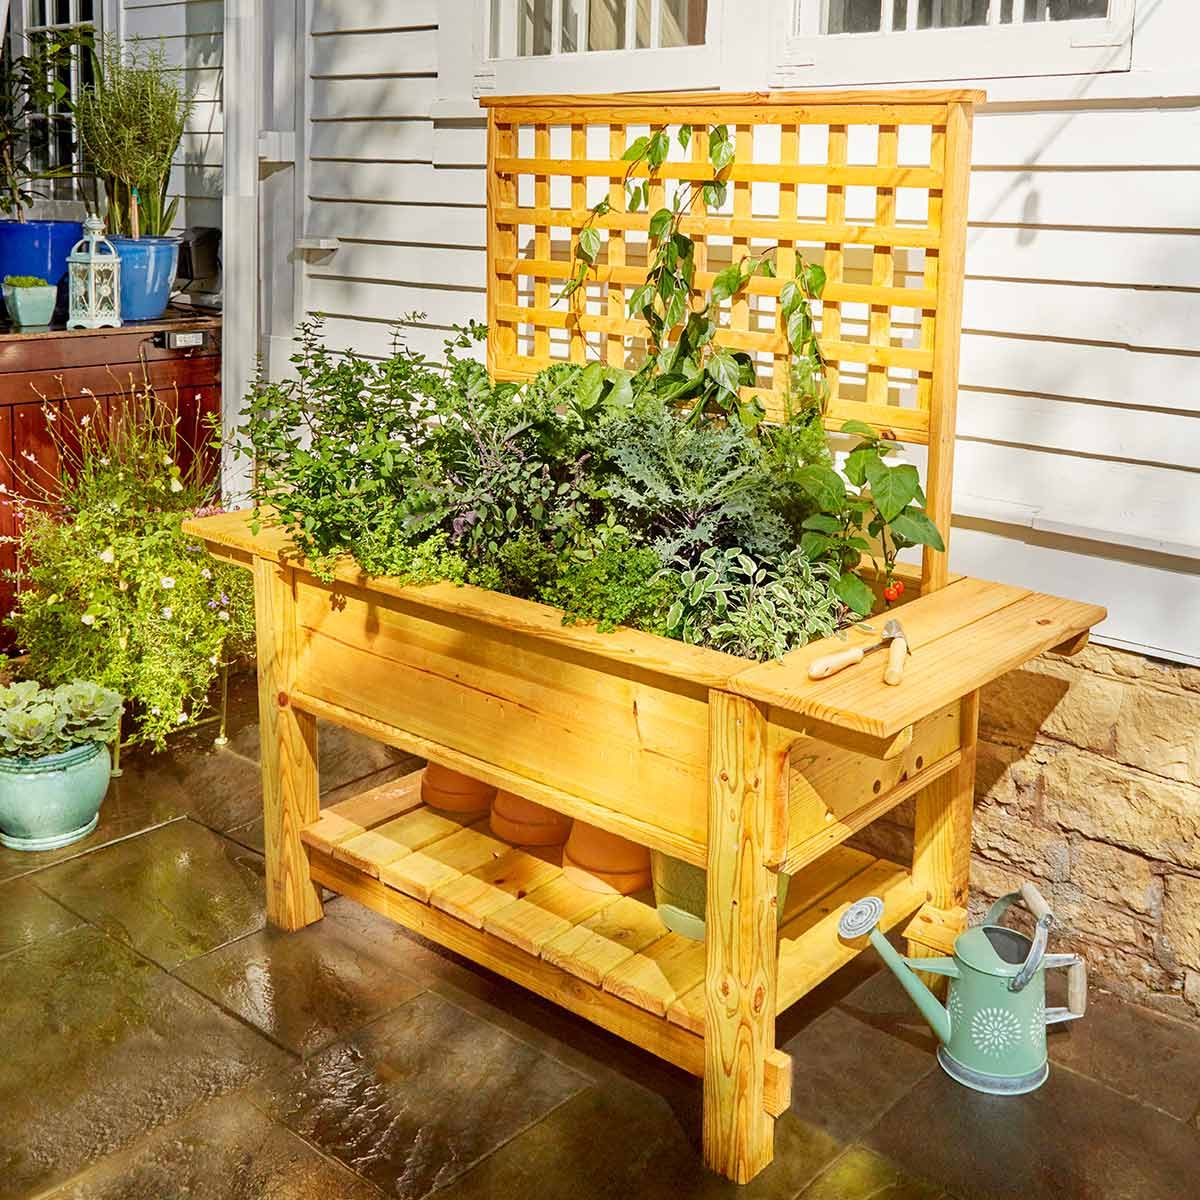 Woodworking projects for the garden